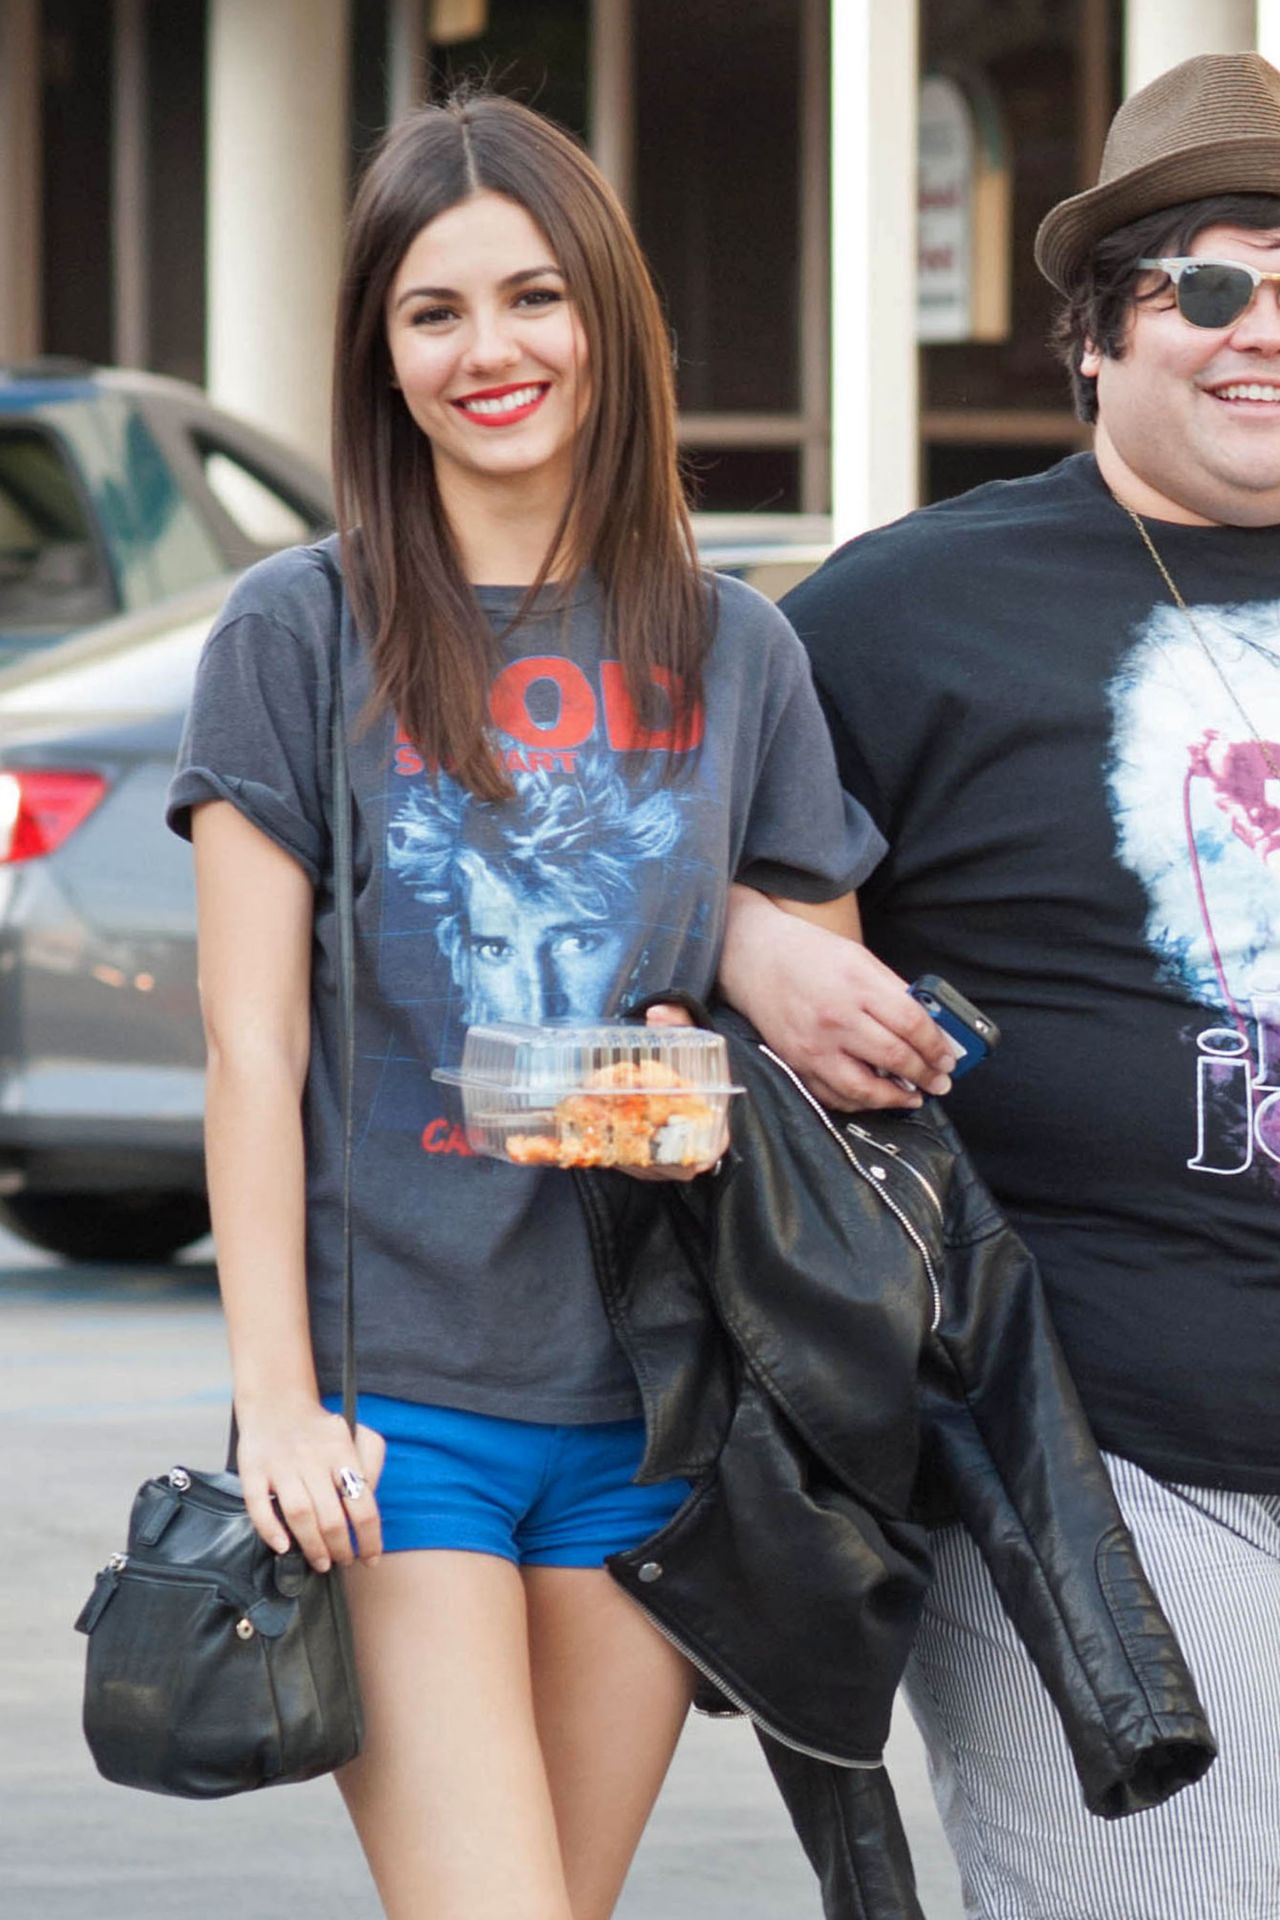 victoria-justice-leggy-in-shorts-having-lunch-with-friends-in-l.a.-january-2014_1.jpg